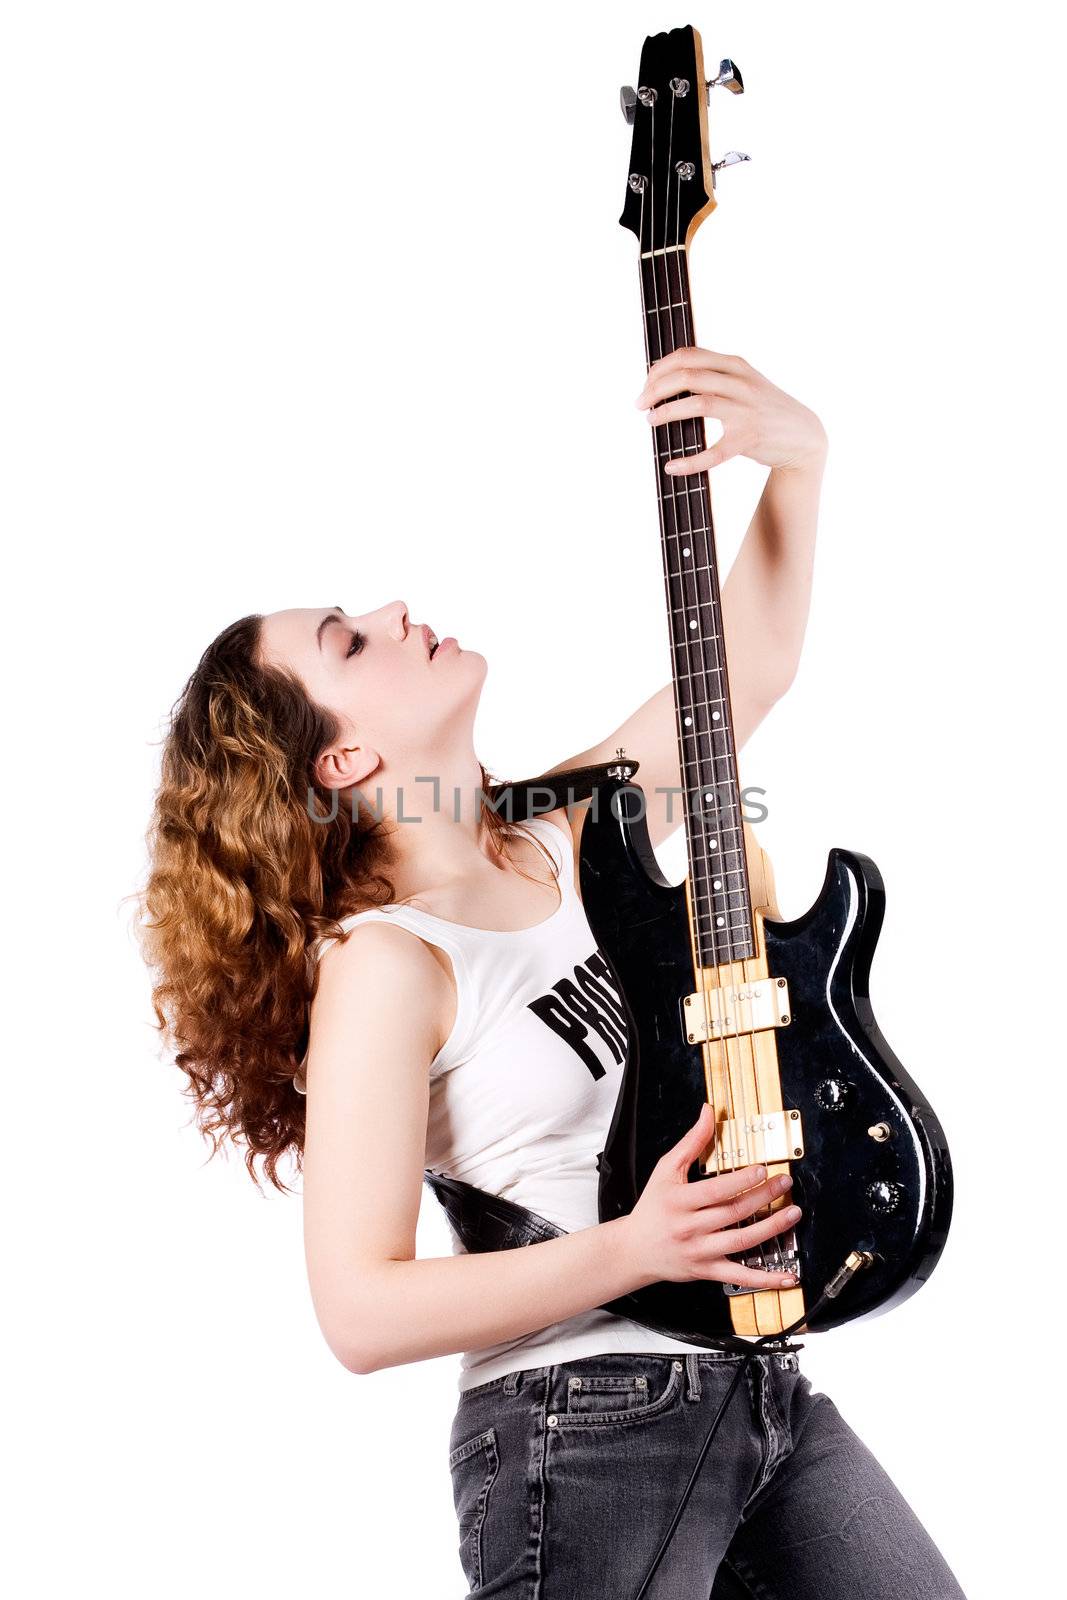 Young female bass guitar player specially isolated on white